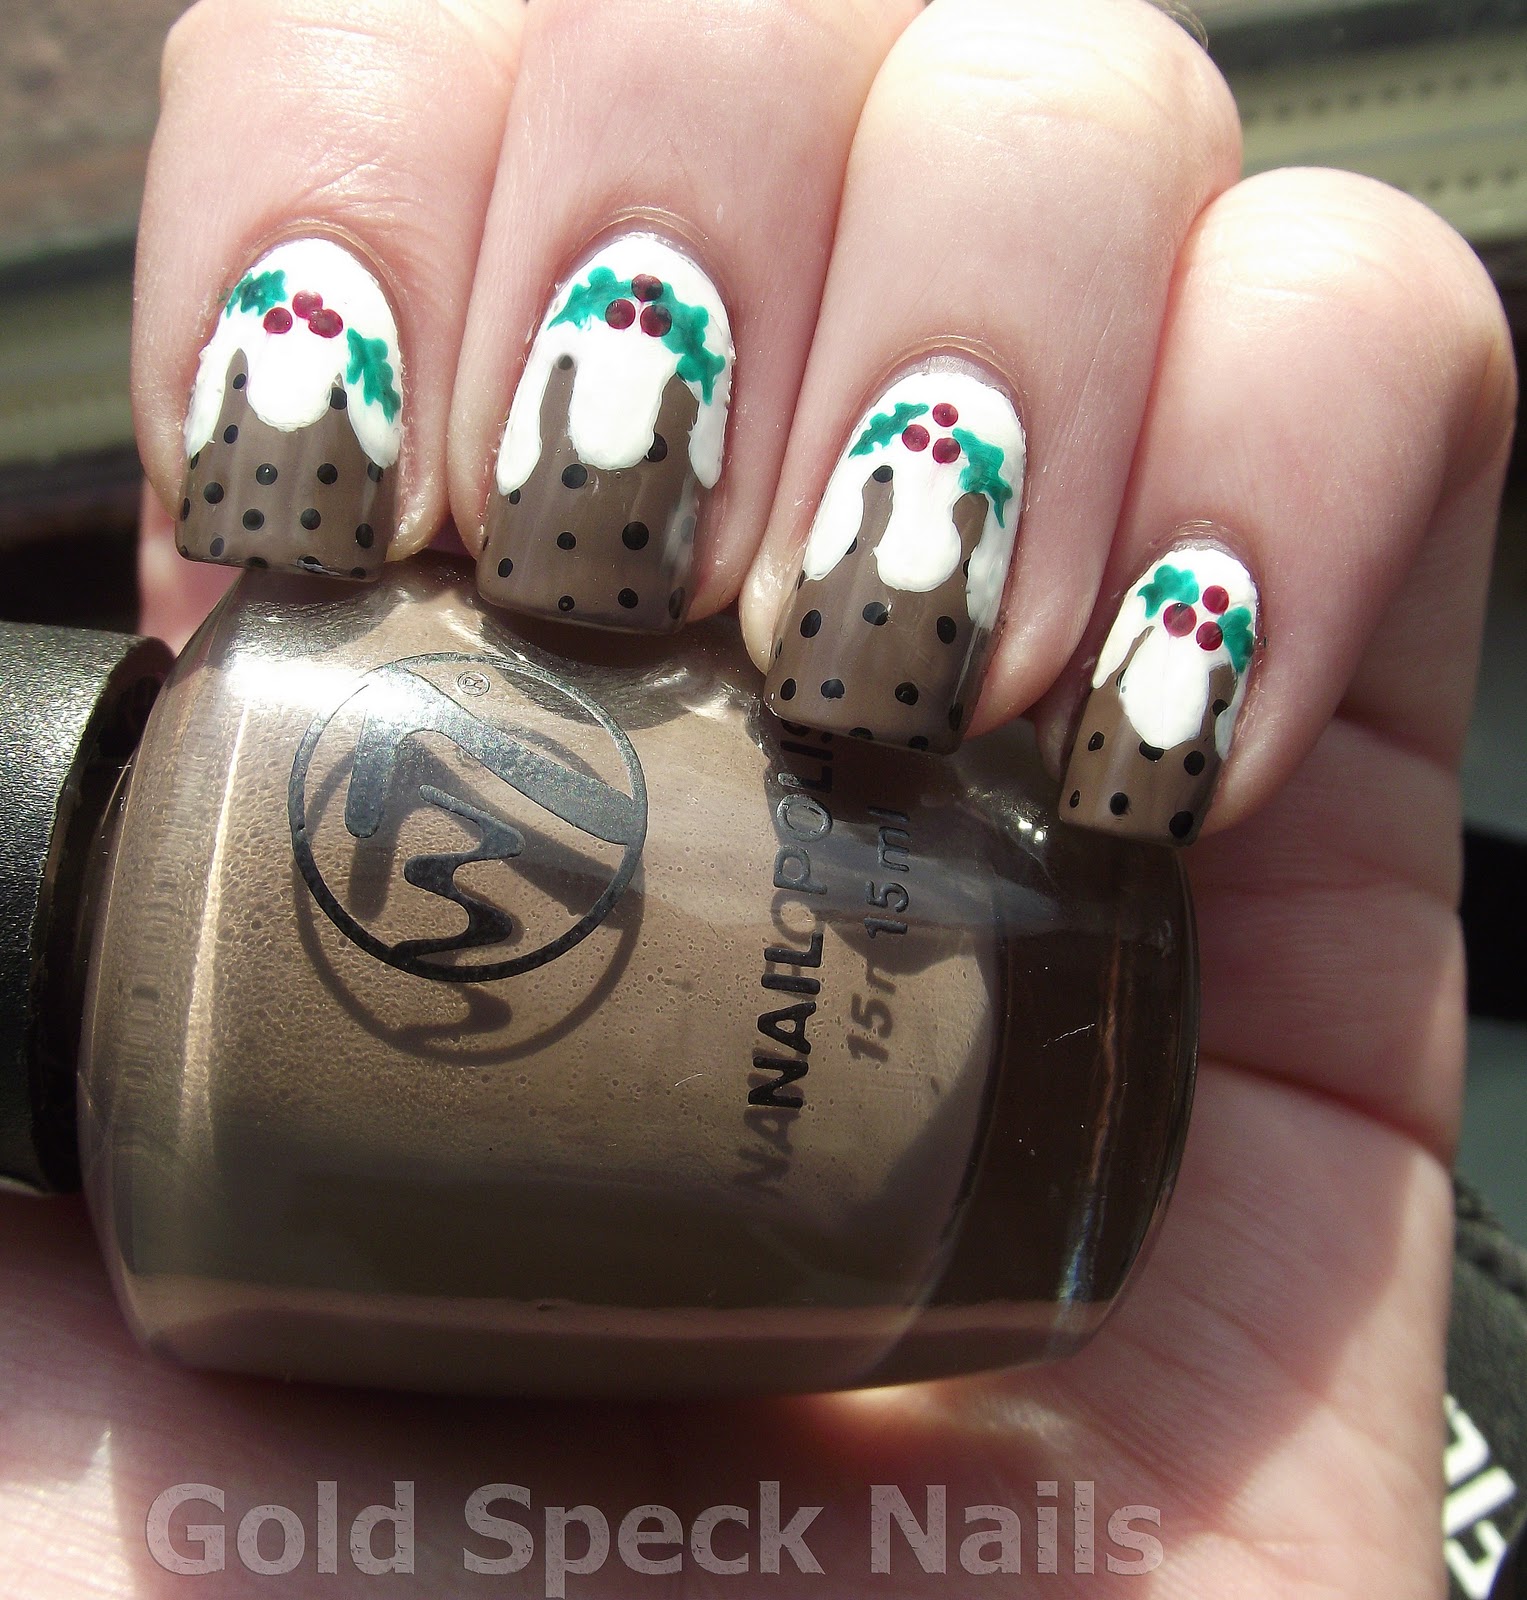 Gold Speck Nails: Christmas Pudding!